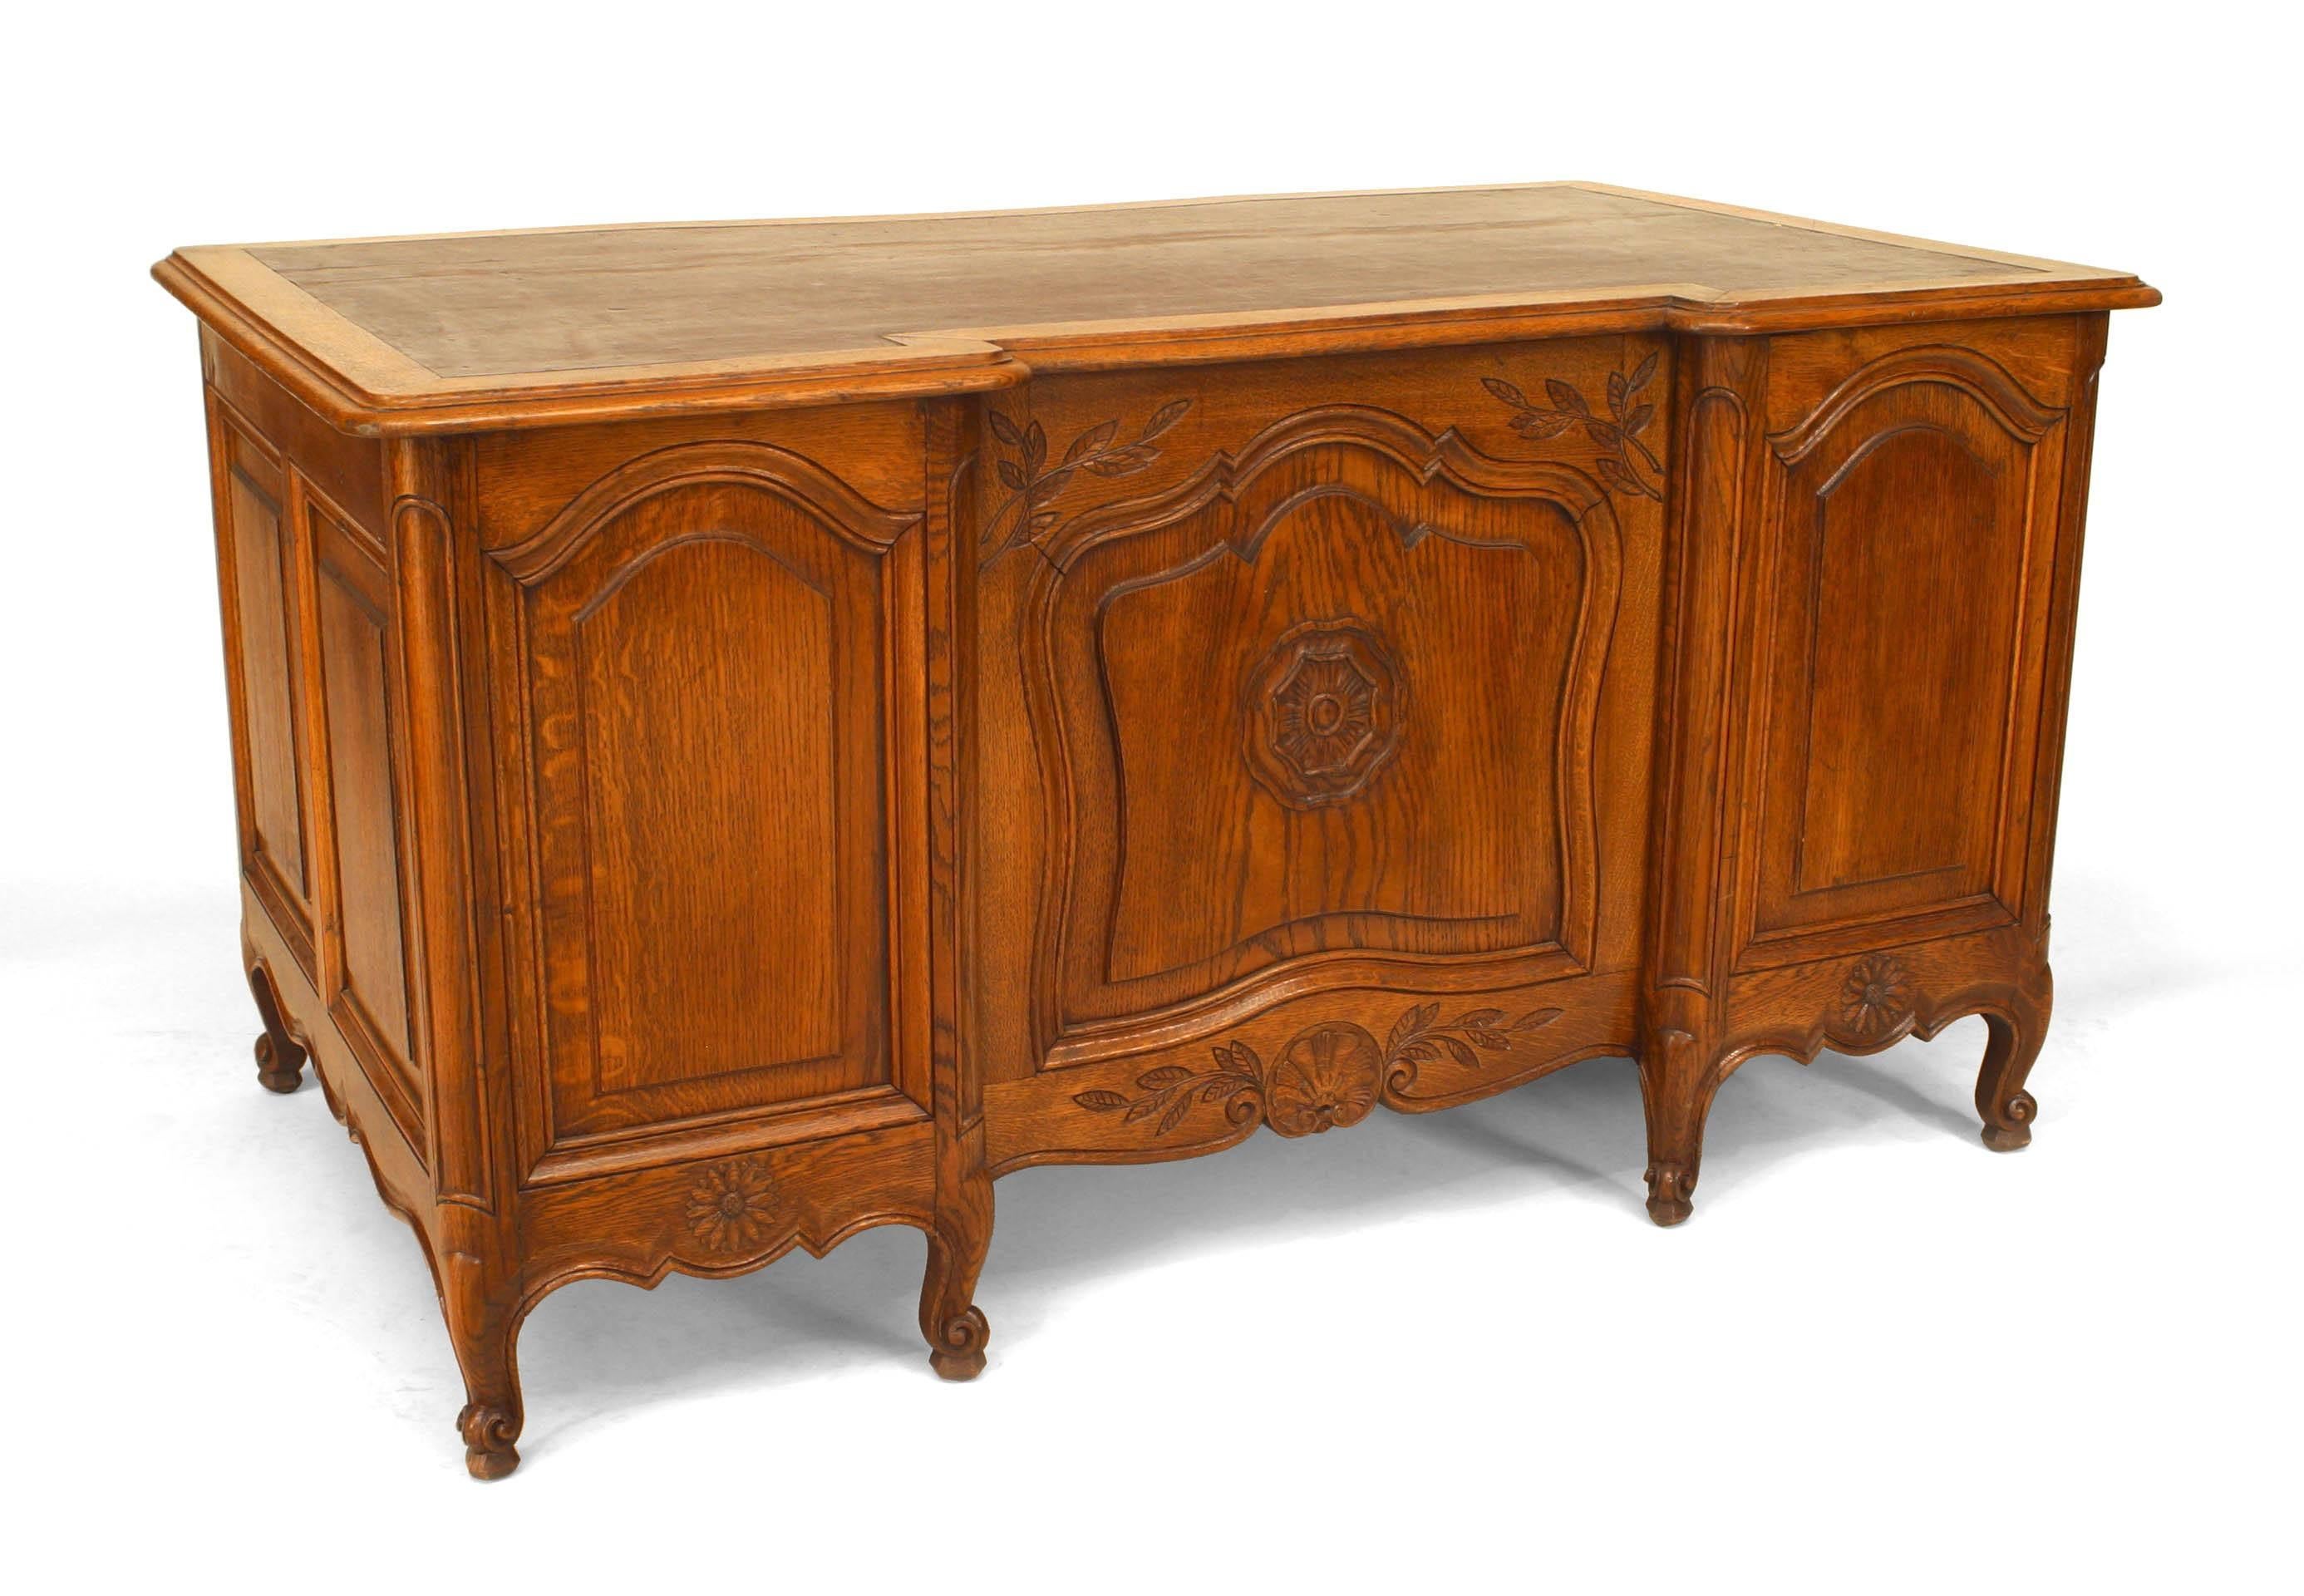 French Louis XV style (19th Century) provincial oak kneehole desk with brown leather top.
